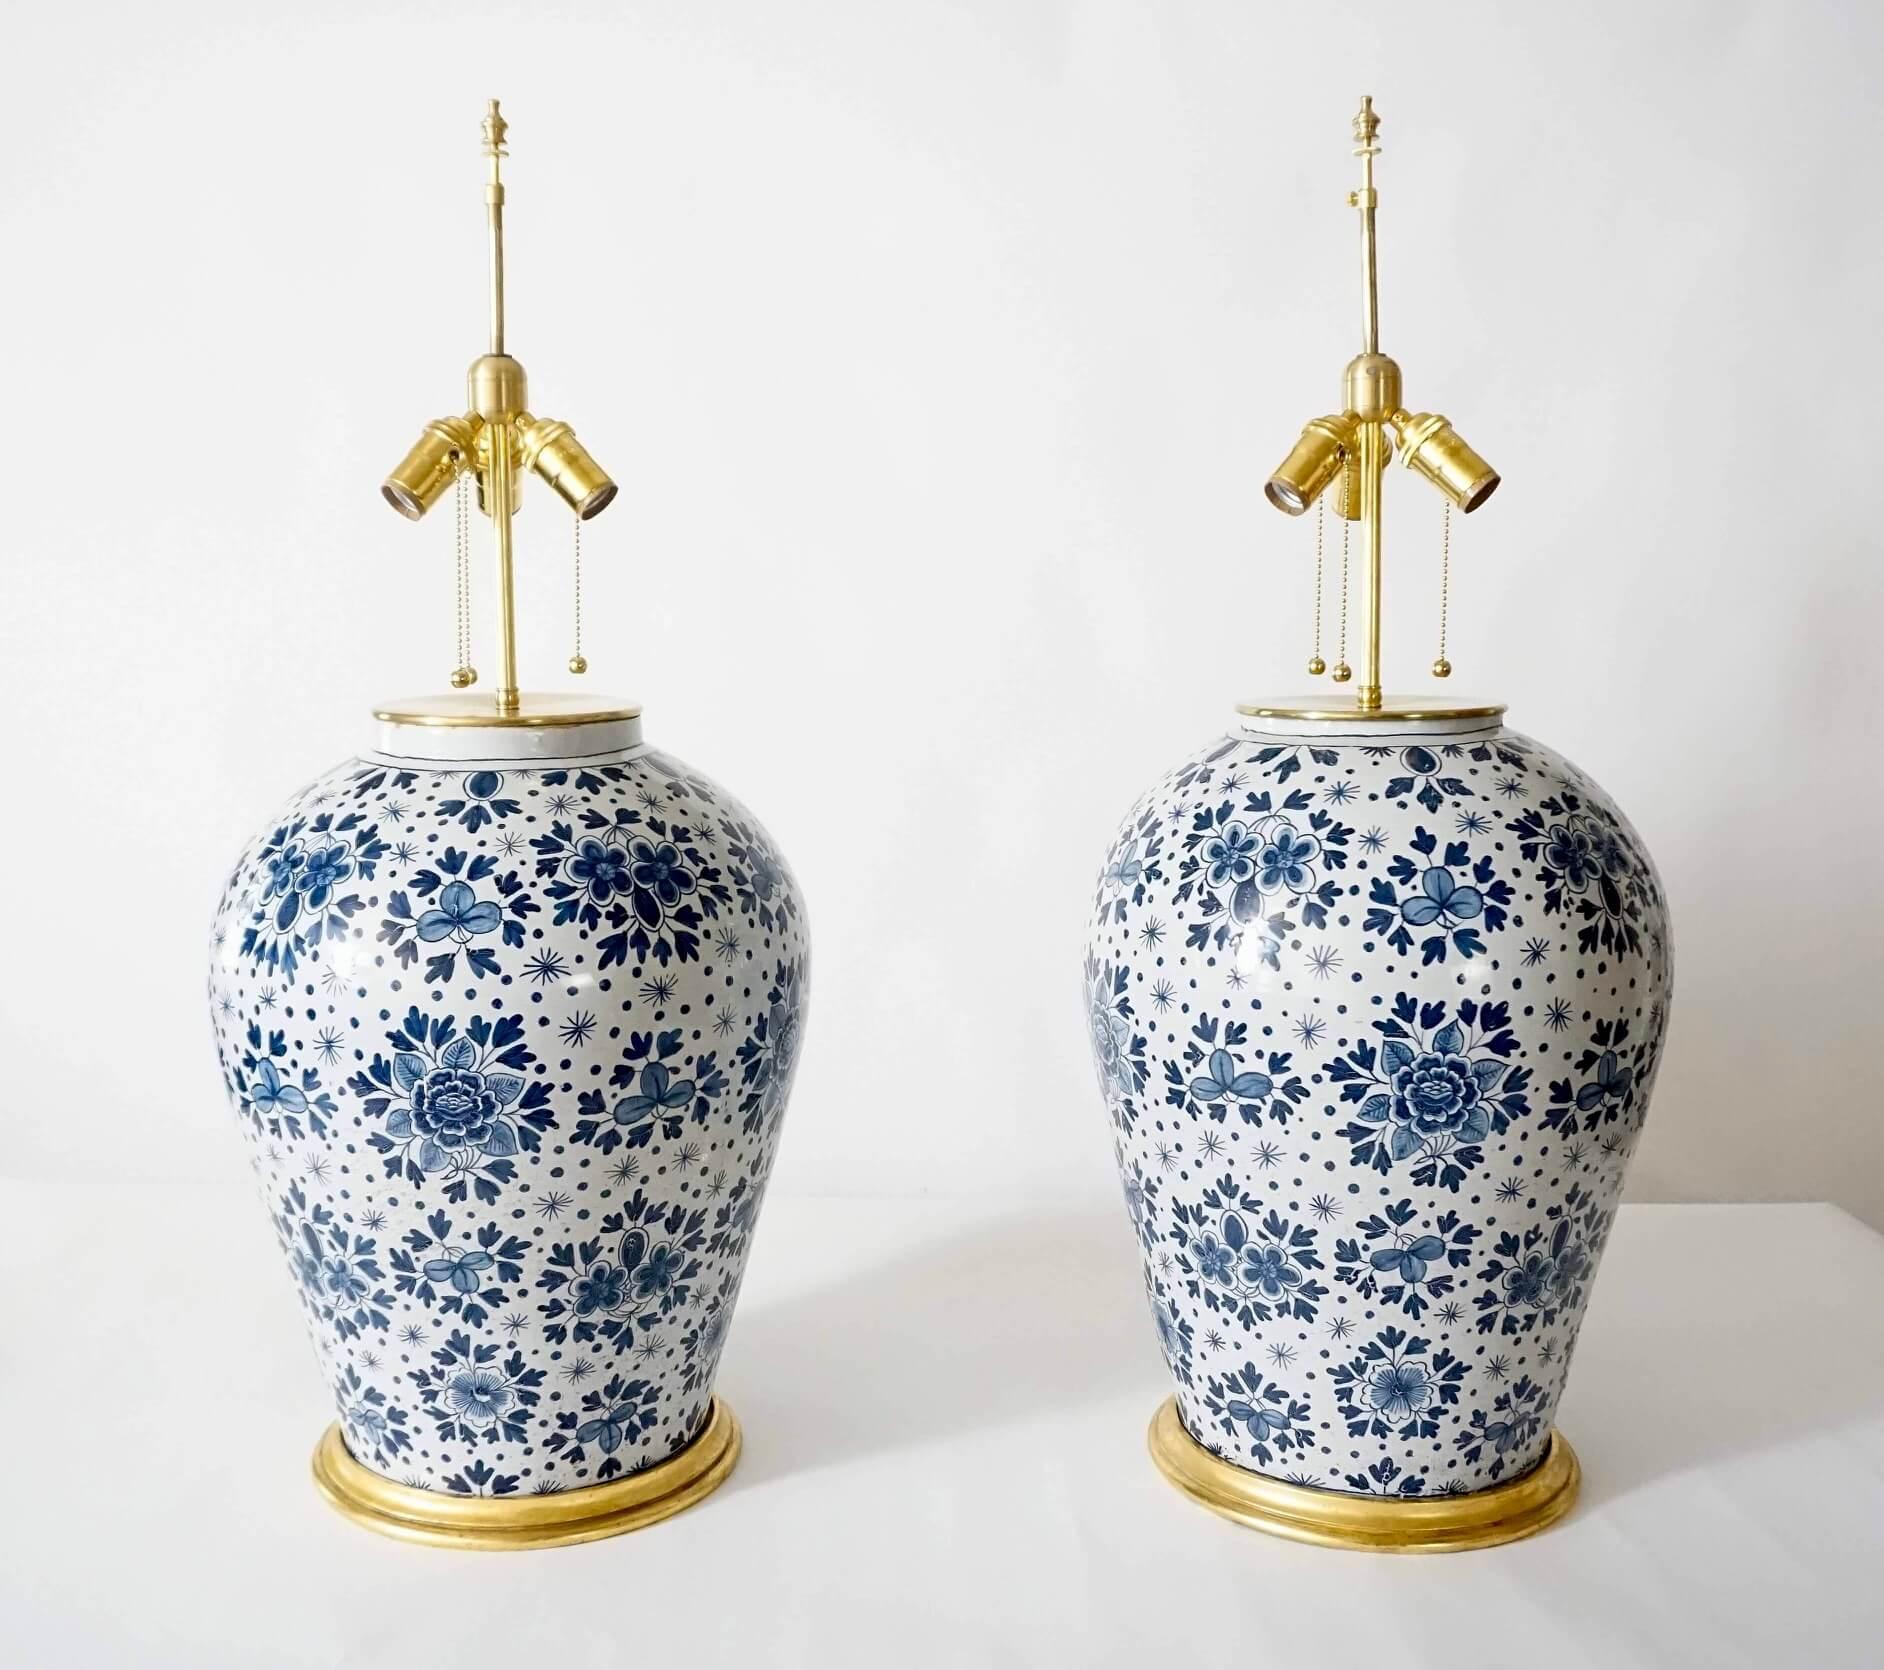 19th Century Pair of Large Scale Blue and White Dutch Delft Vase Table Lamps, circa 1850 For Sale